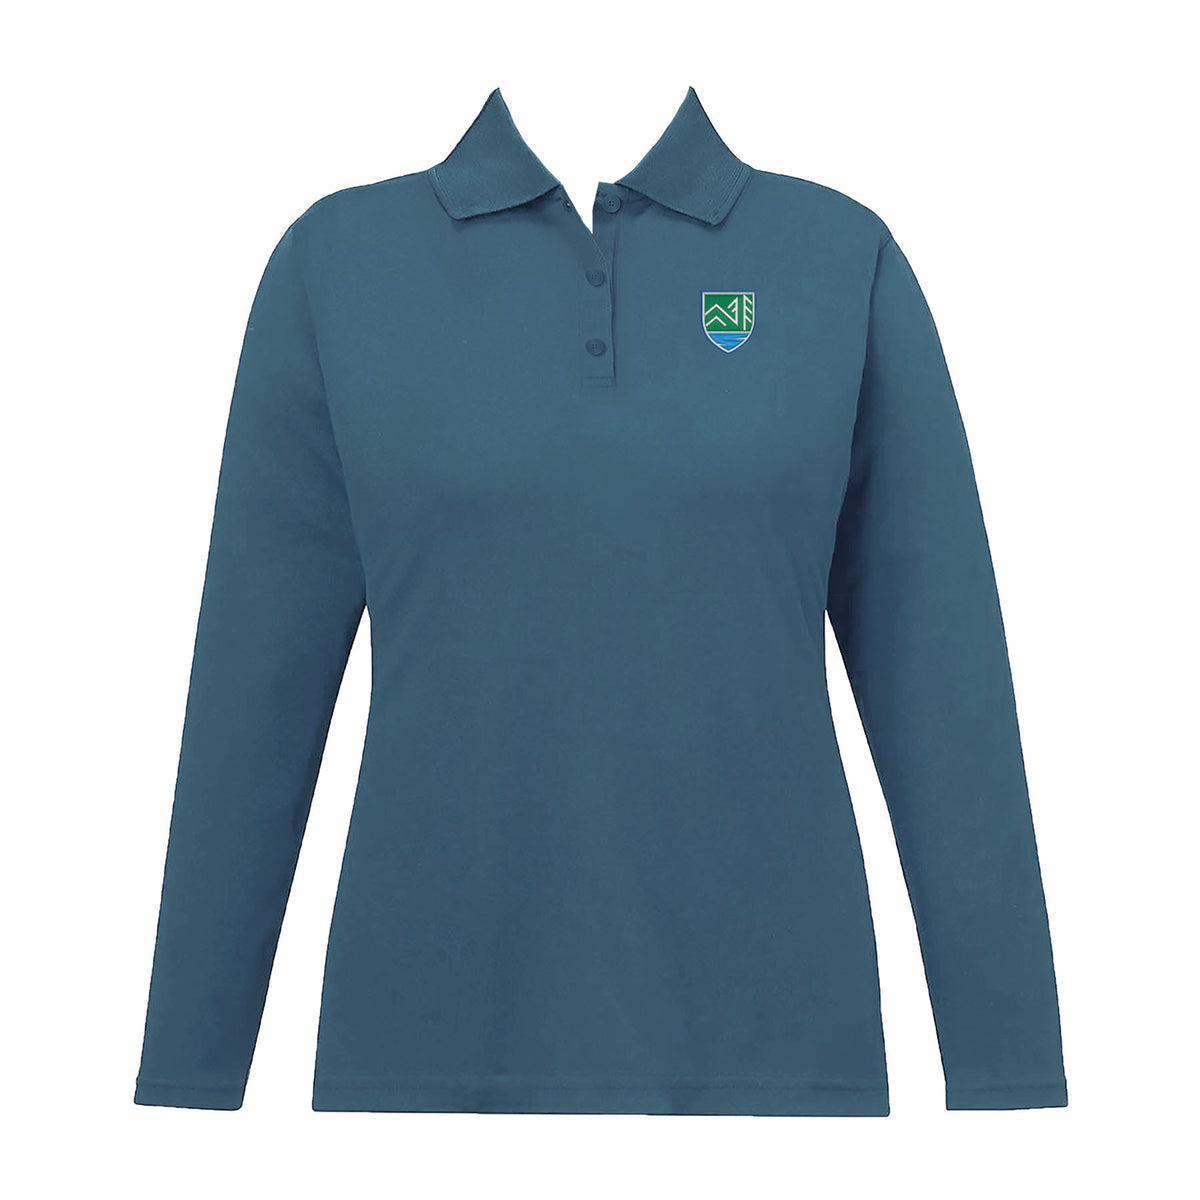 ASPENGROVE K-7 GOLF SHIRT, FITTED, LONG SLEEVE, YOUTH